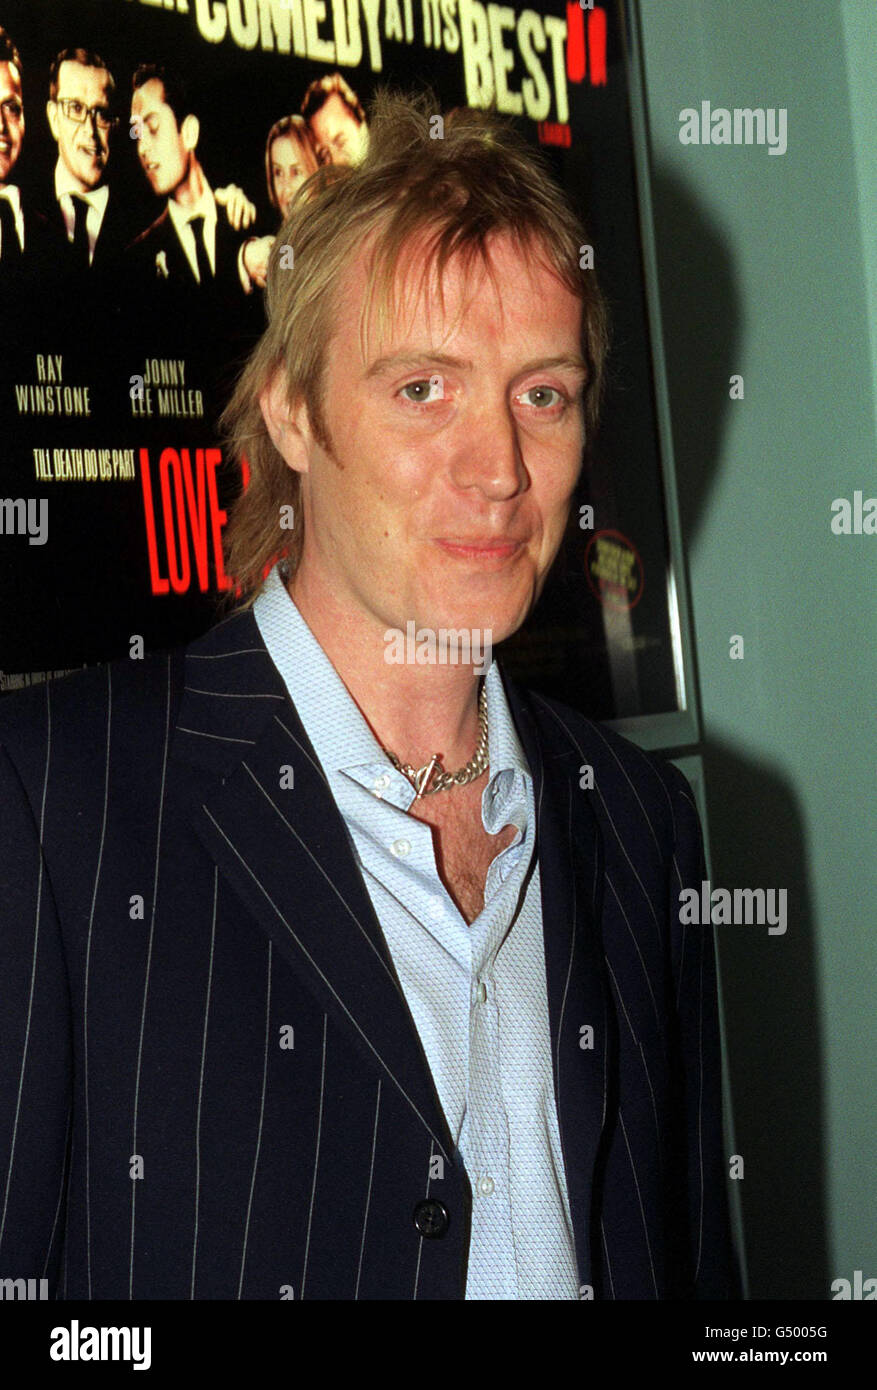 Welsh actor Rhys Ifans, who stars in the film, arriving for the world premiere of 'Love, Honour & Obey', at the Camden Odeon cinema in west London. Stock Photo